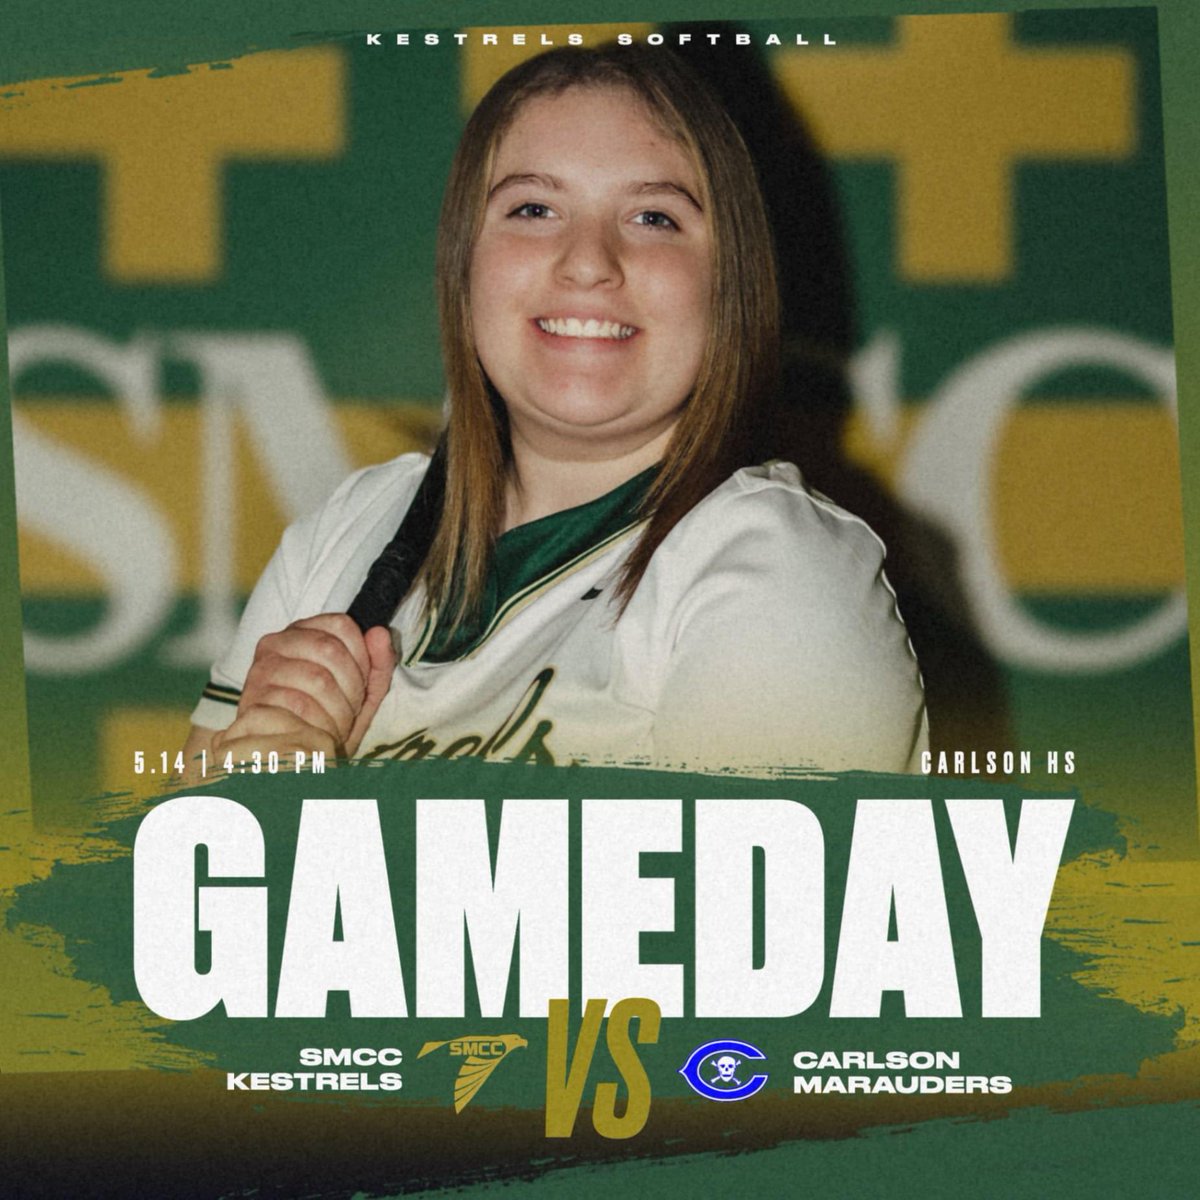 Game Day!
•
Varsity will be on the road to Carlson 
JV will be hosting Carlson
First pitch is set for 4:30pm
#KestrelSoftball #GoKestrels #SMCCAthletics